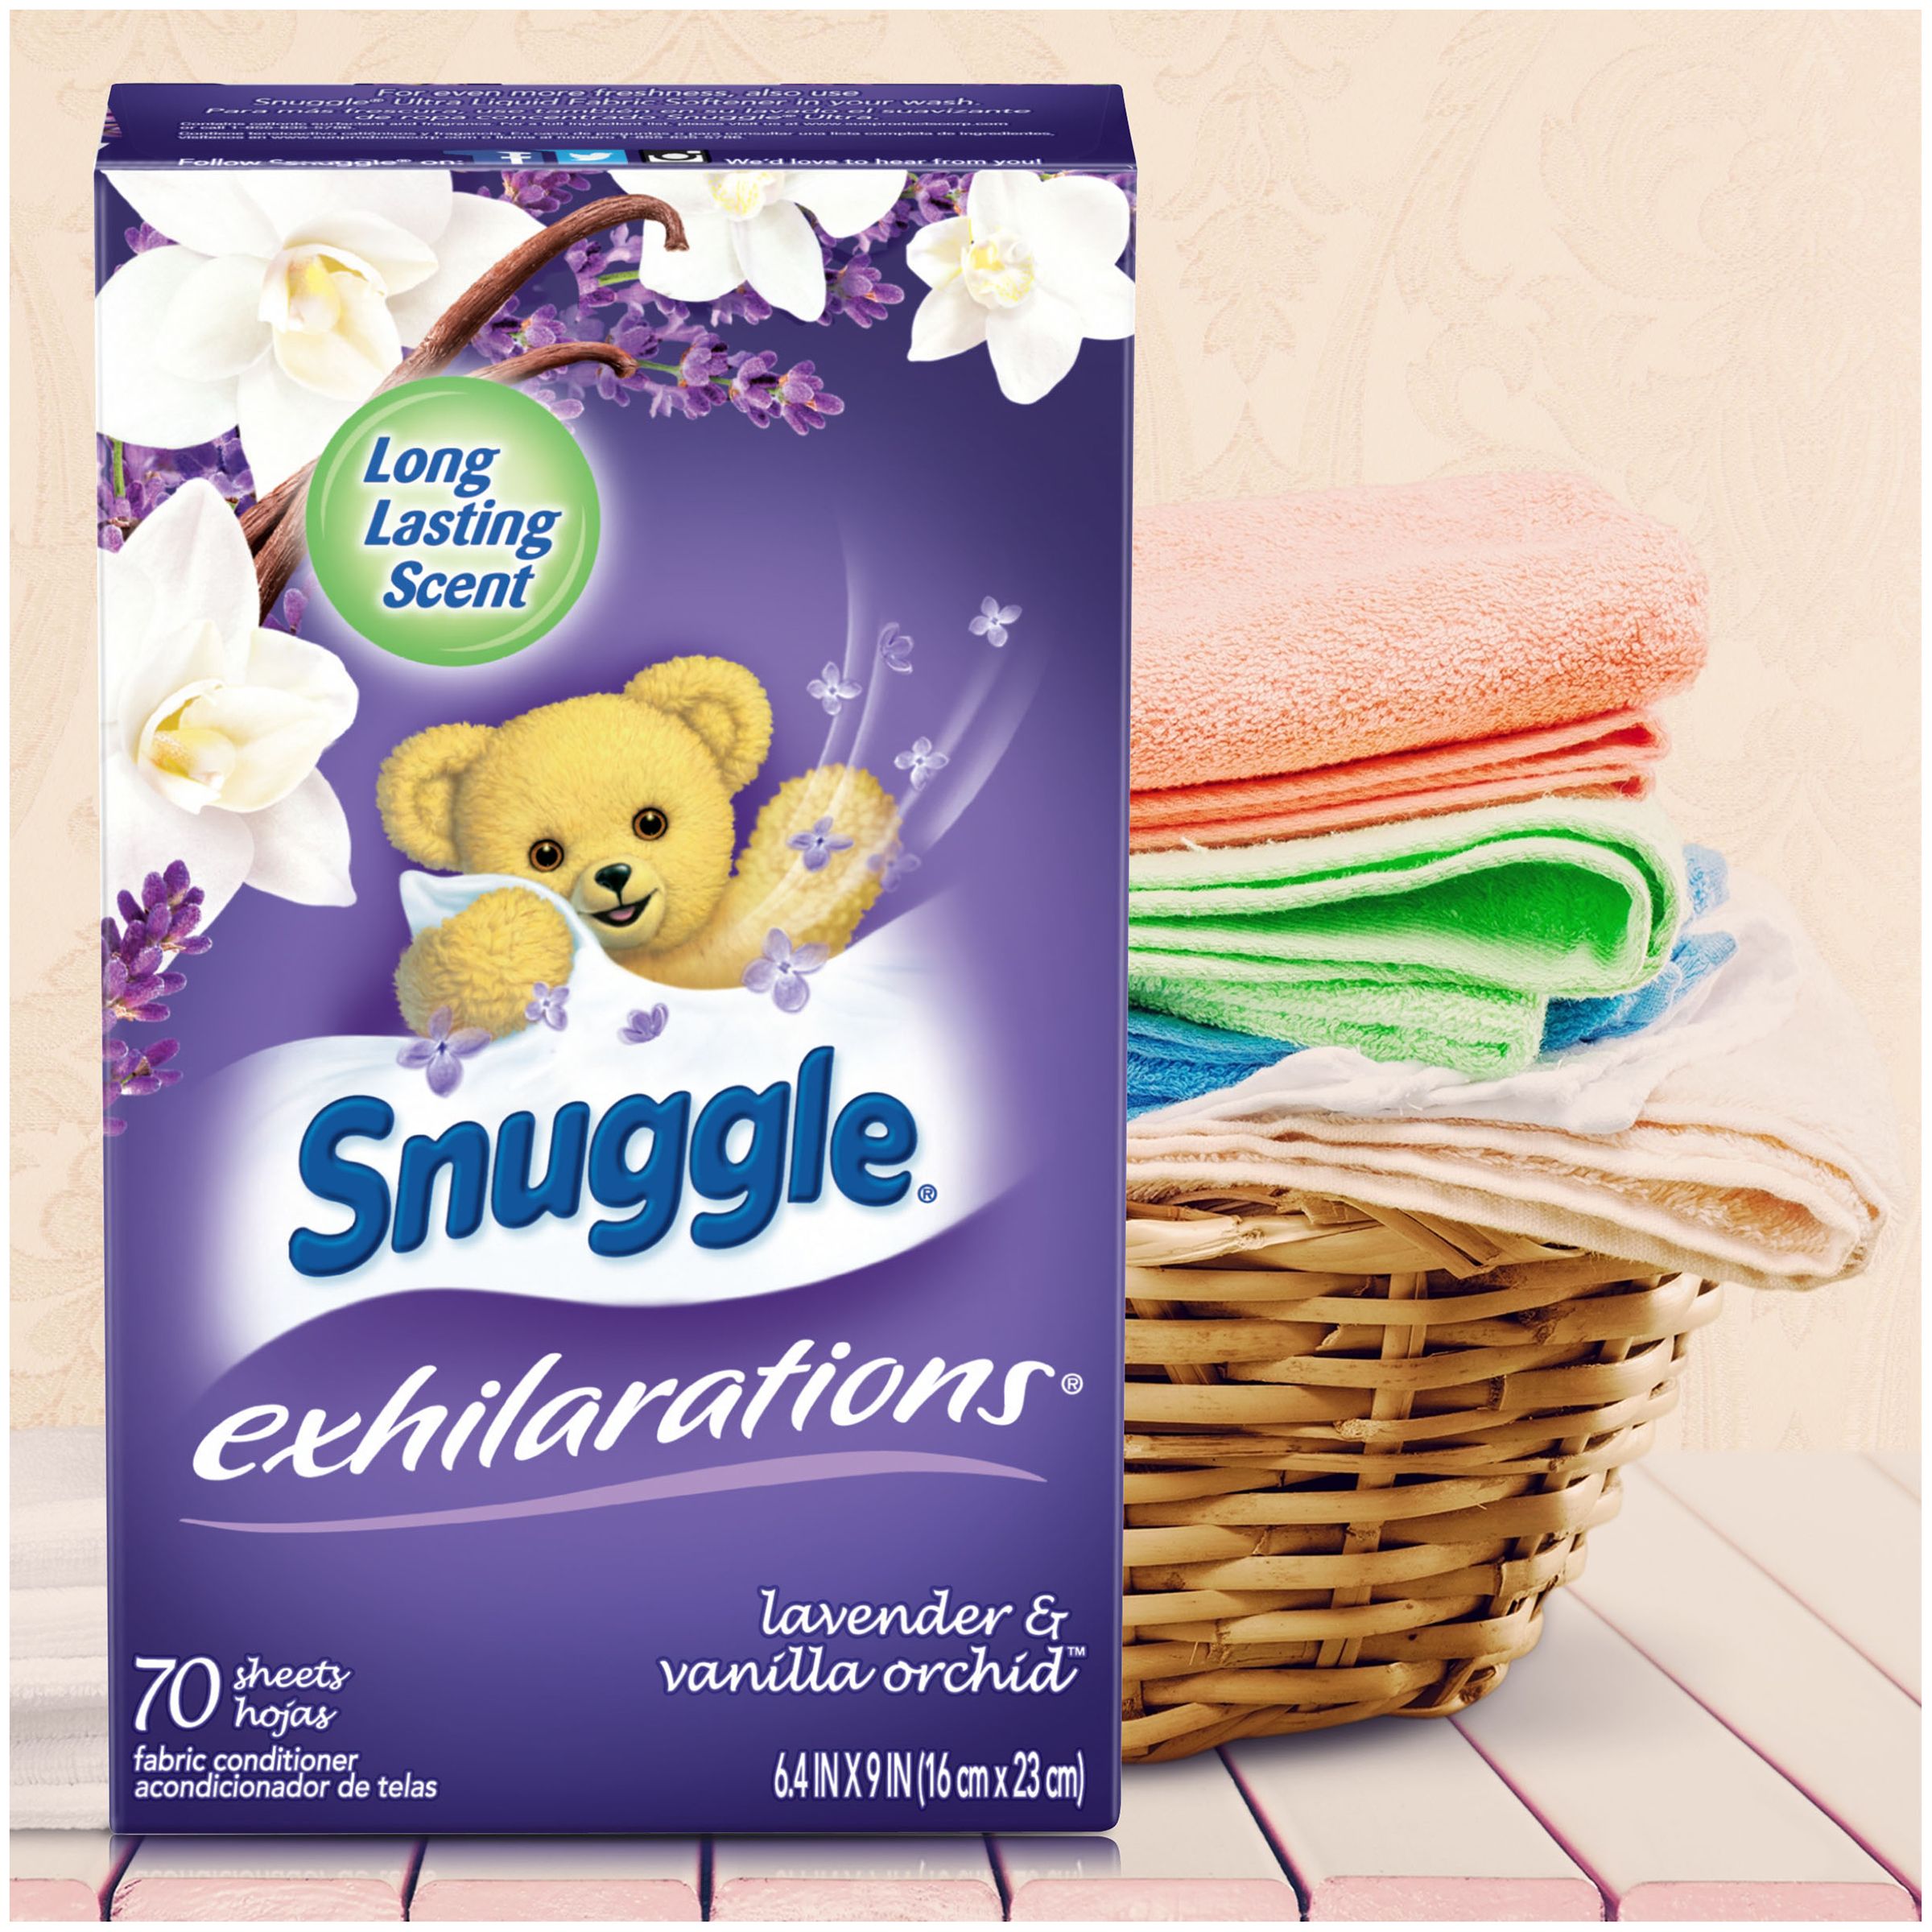 Snuggle  Fabric Softener Dryer Sheets, Lavender & Vanilla Orchid, 70 Count - image 5 of 5